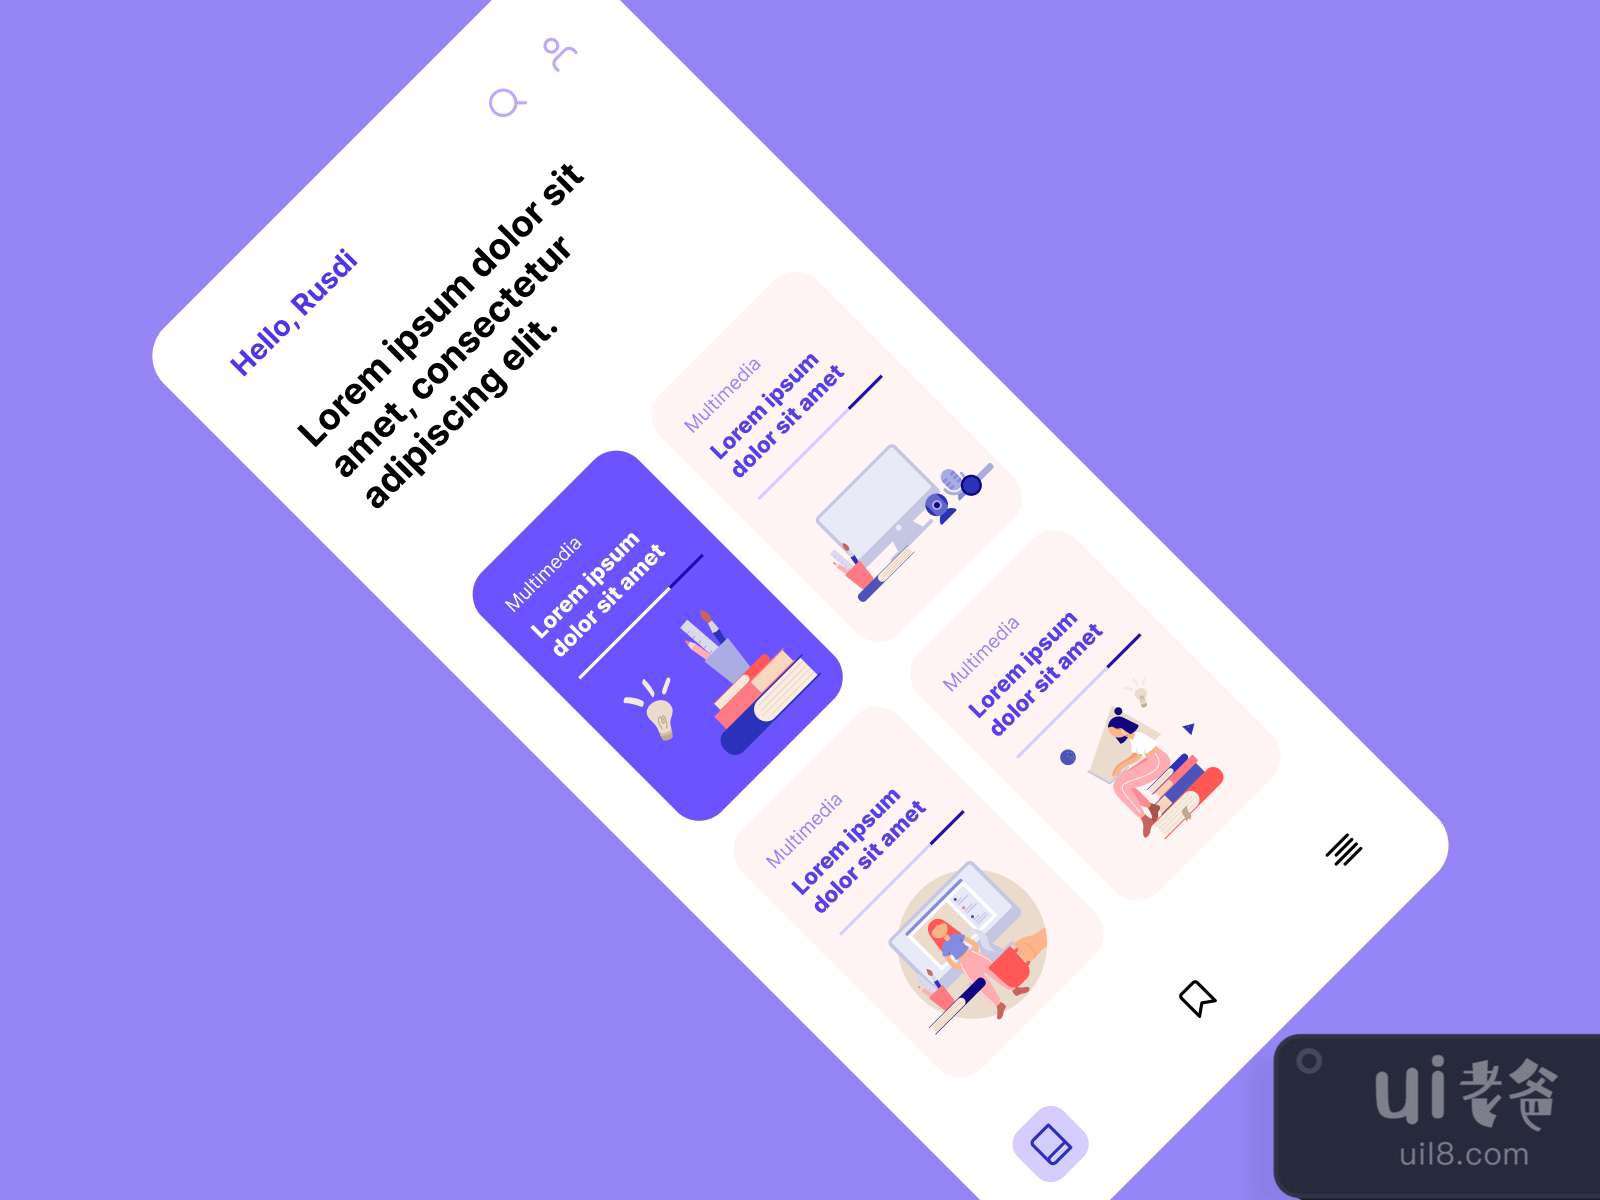 Online Learning App for Figma and Adobe XD No 2